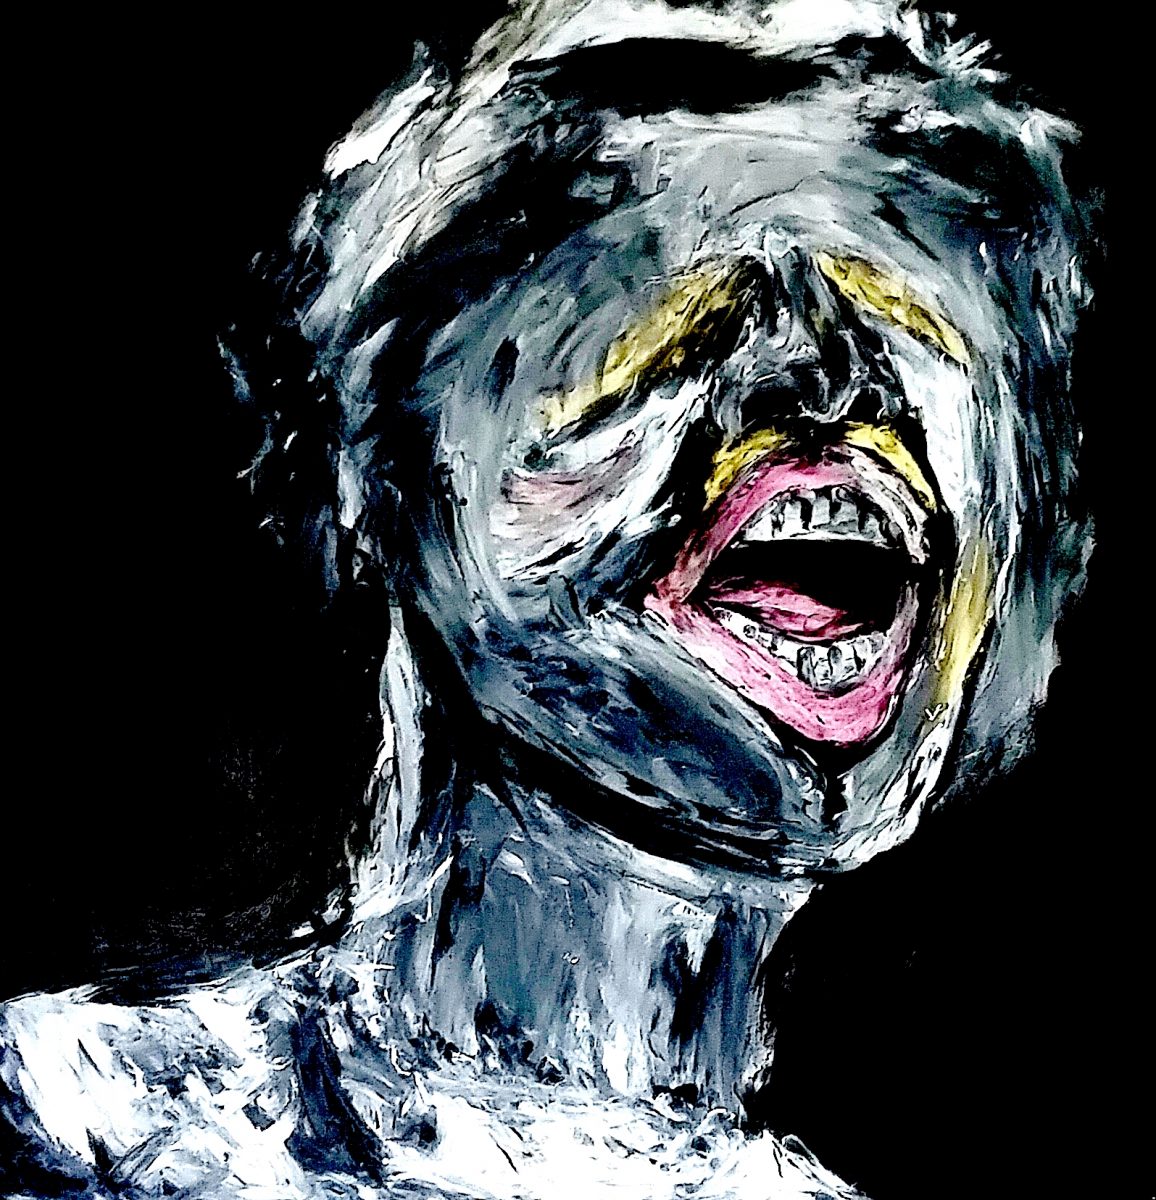 A painted portrait of a figure on a black background. The figure is painted with thick white and grey brushstrokes as well as some yellow highlights. The mouth is wide open, exposing teeth and tongue. The eyes are distorted beyond recognition.